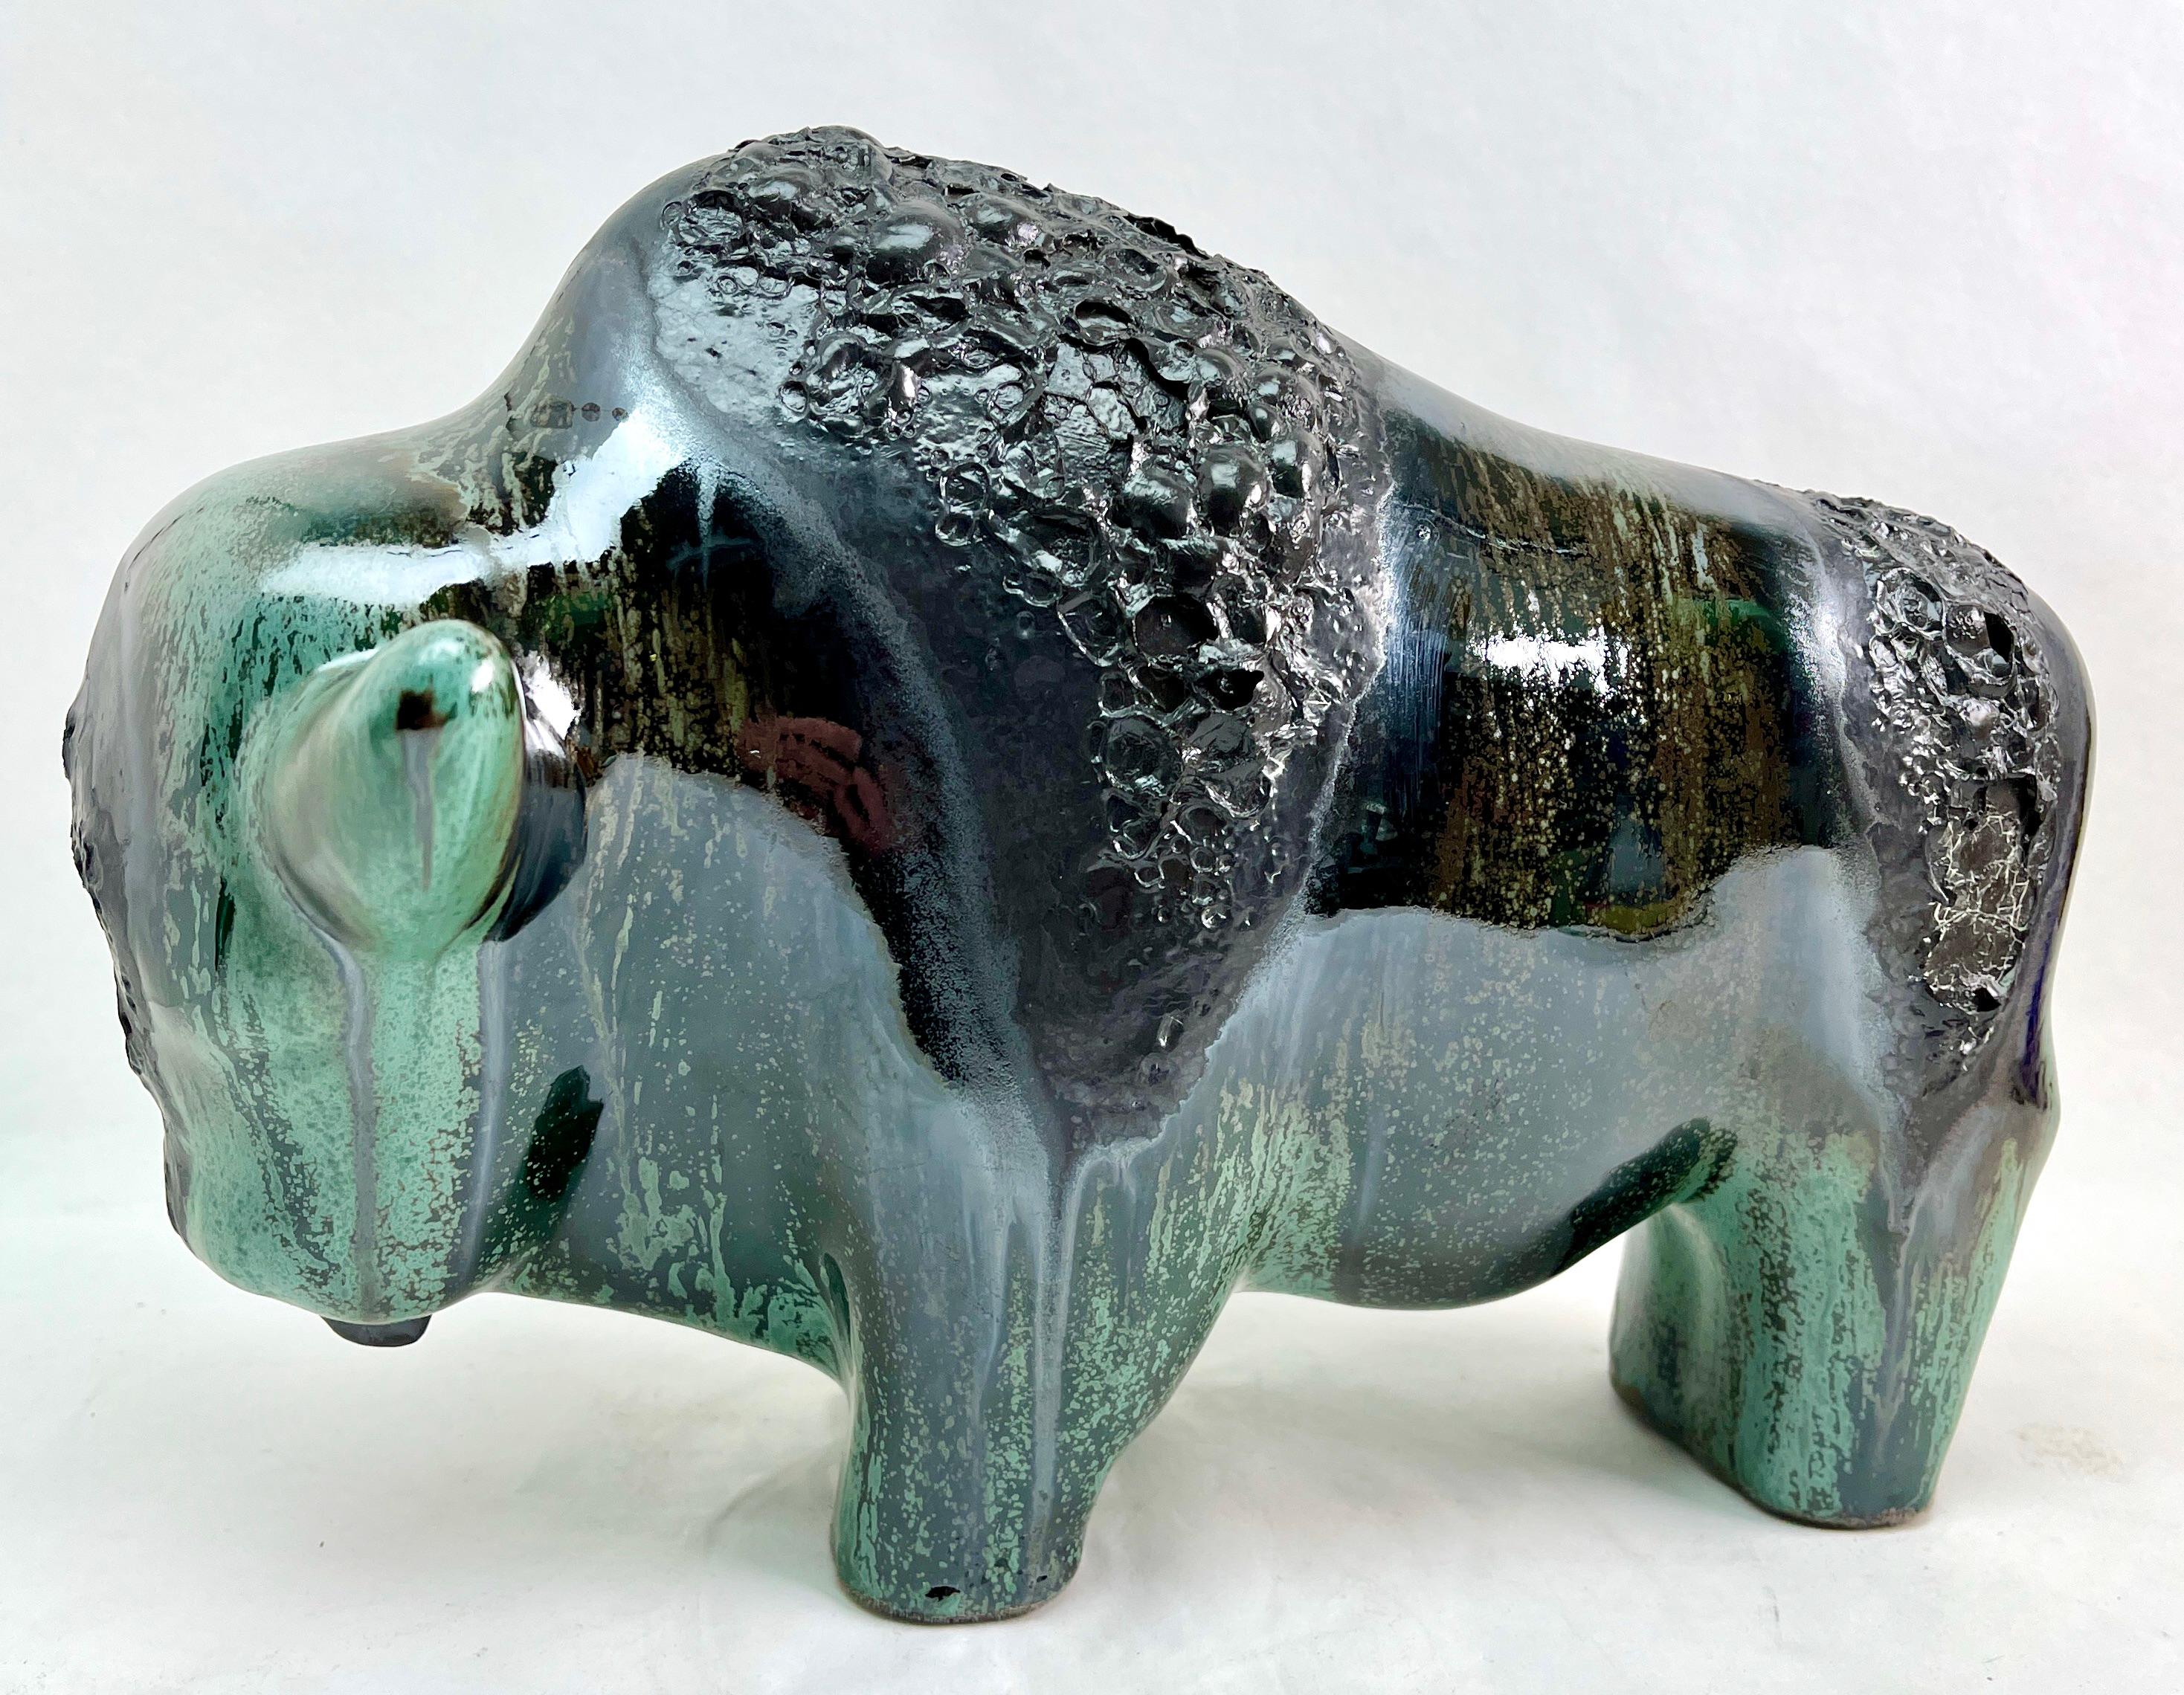 Dramatic piece of German 20th century ceramics inspired by natur.:

Buffalo by Otto Keramiek
Ceramic buffalo figurine by Otto Gerharz (former director at Ruscha) from design thought to be by Tschoerner. It’s an icon of midcentury interior decor